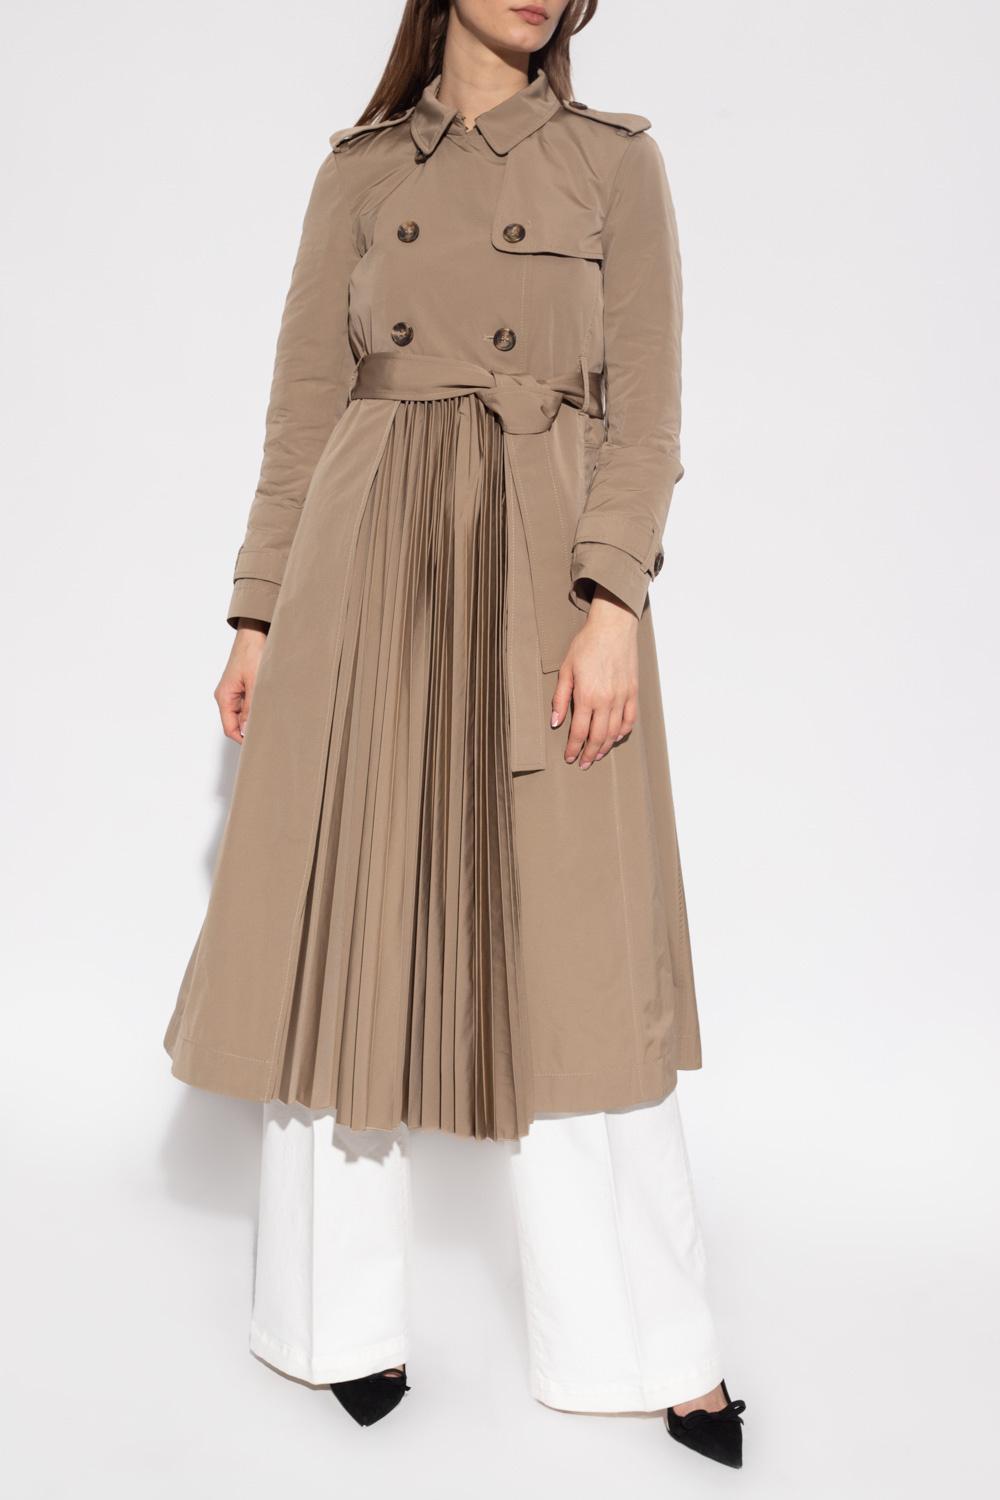 RED Valentino Pleated Trench Coat in Natural | Lyst